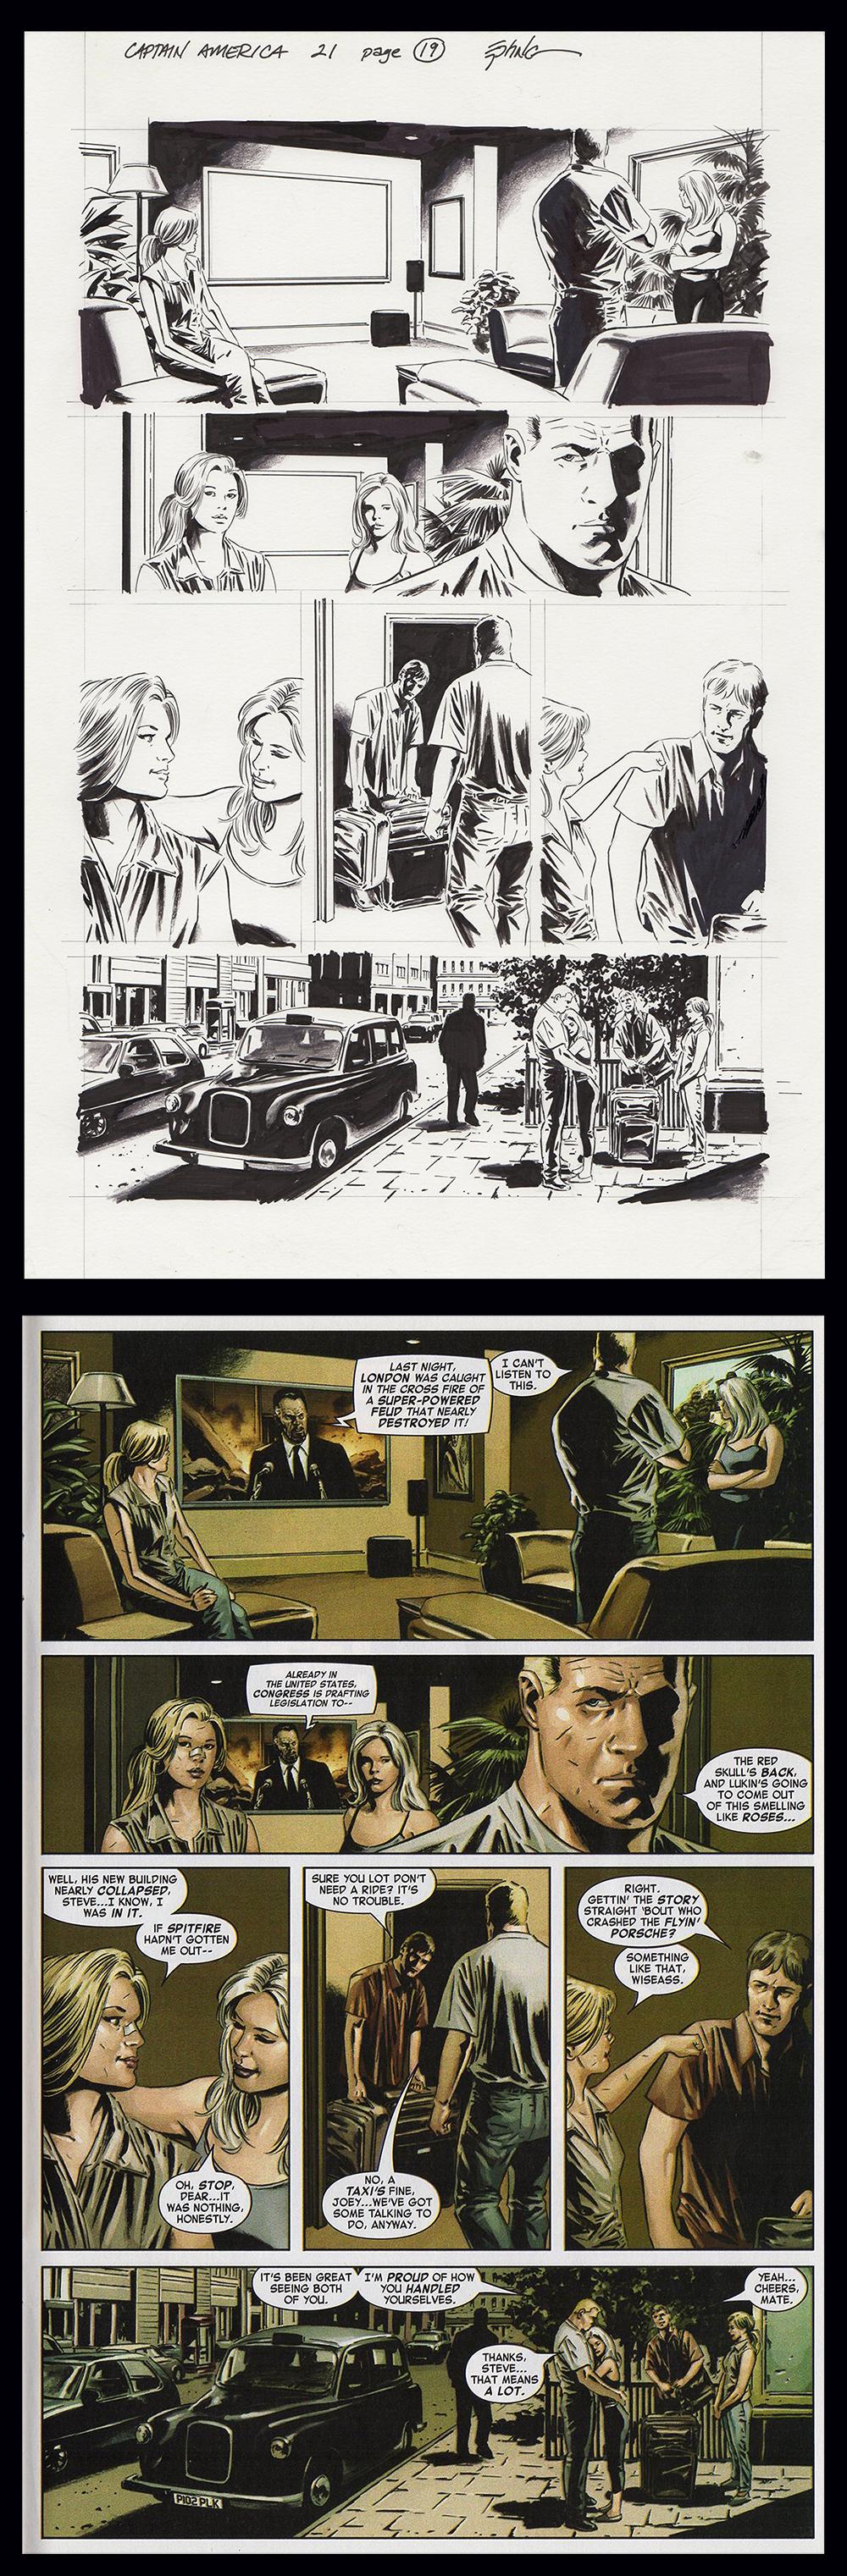 Image: Captain America #21 page 19 art by Steve Epting